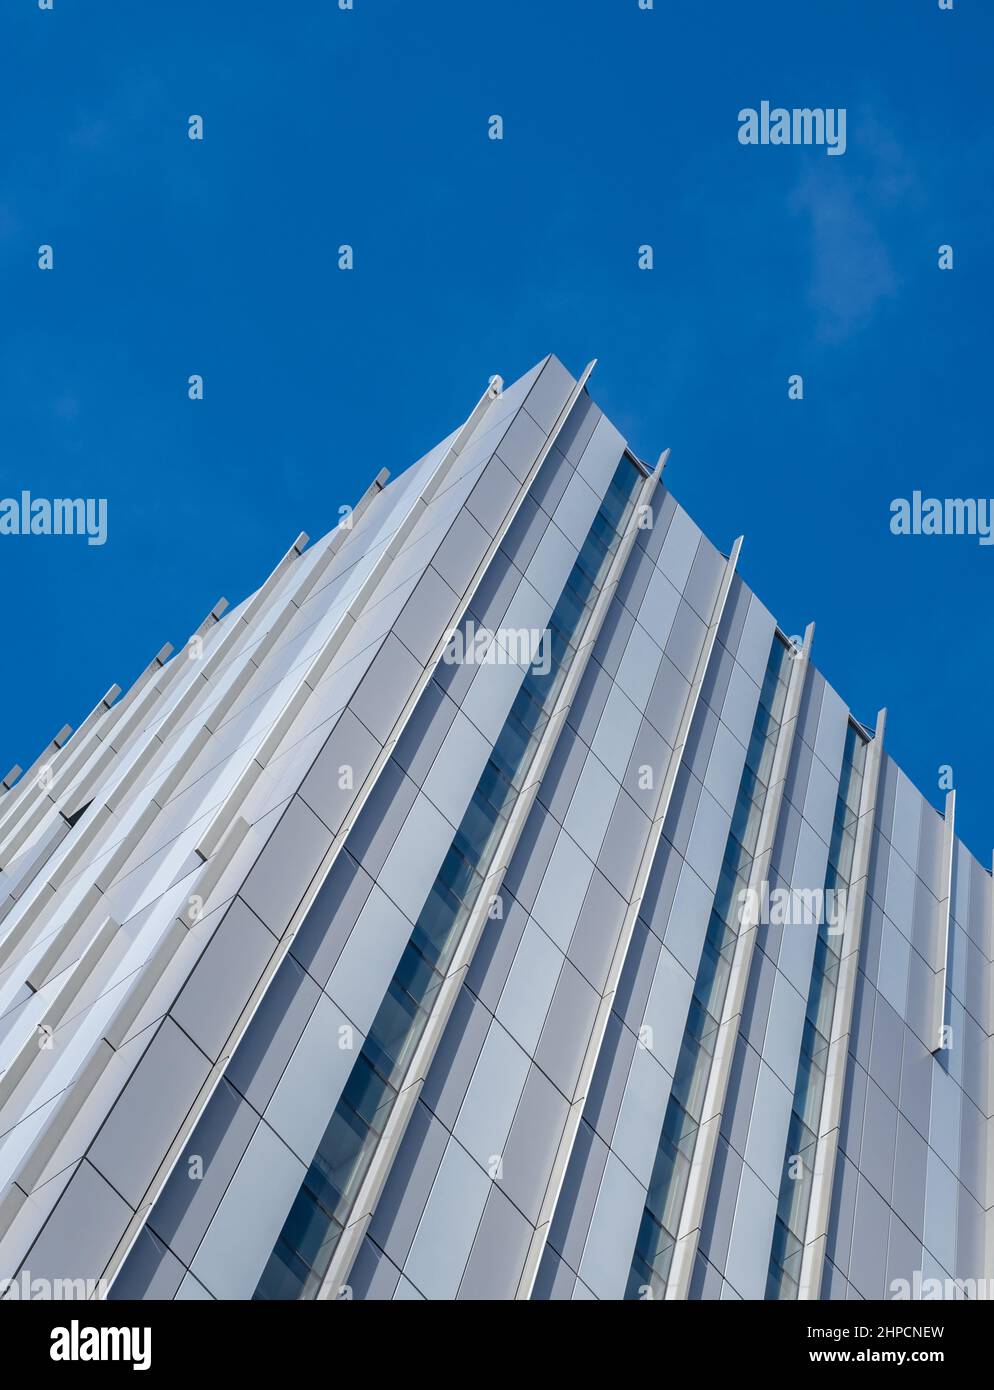 Abstract Architecture Image Of A Futuristic Skyscraper With Copy Space Stock Photo